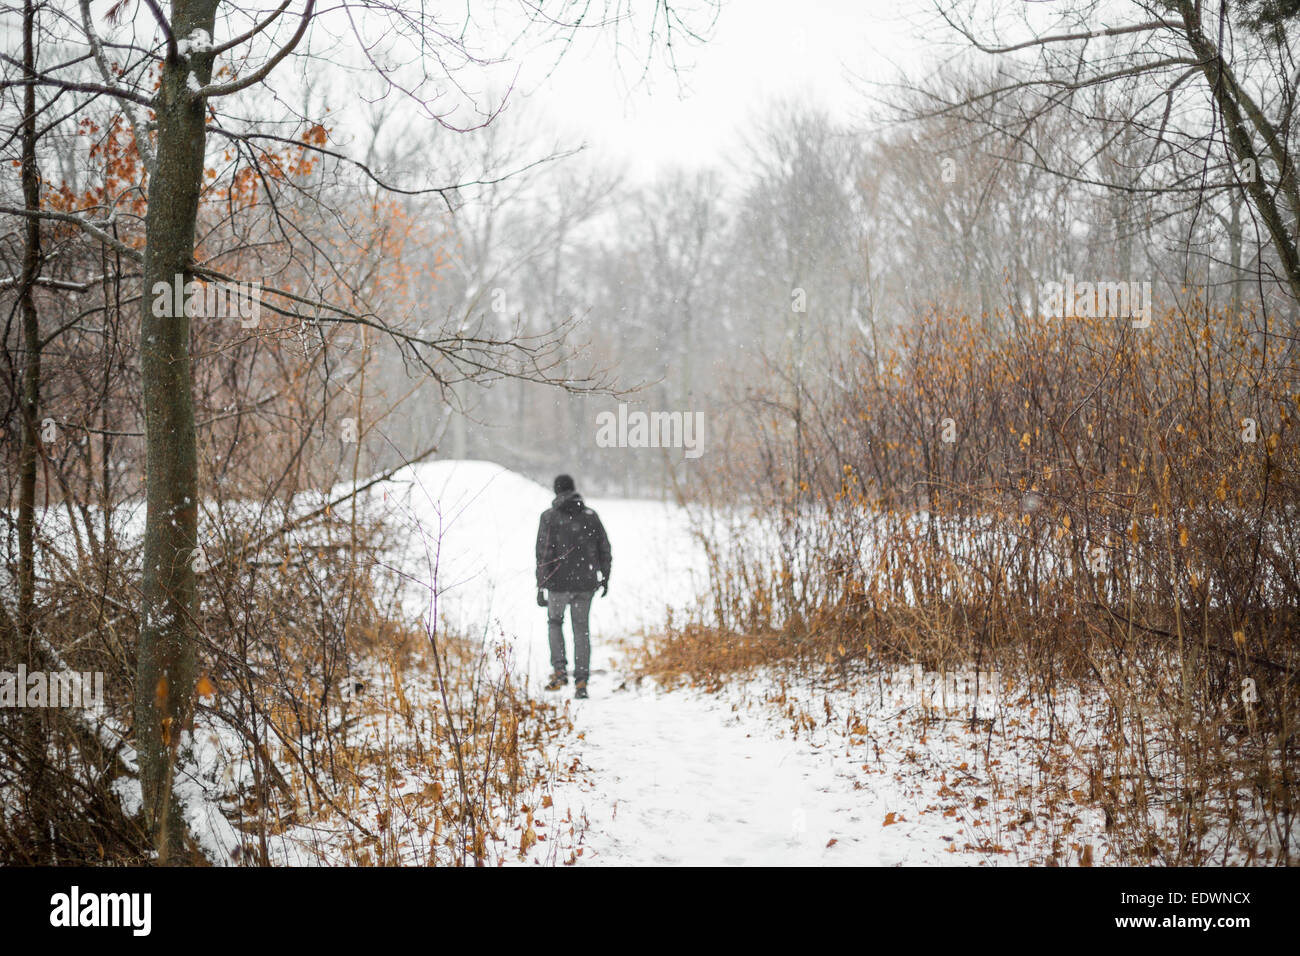 A man walking on a path through a snowy forest Stock Photo